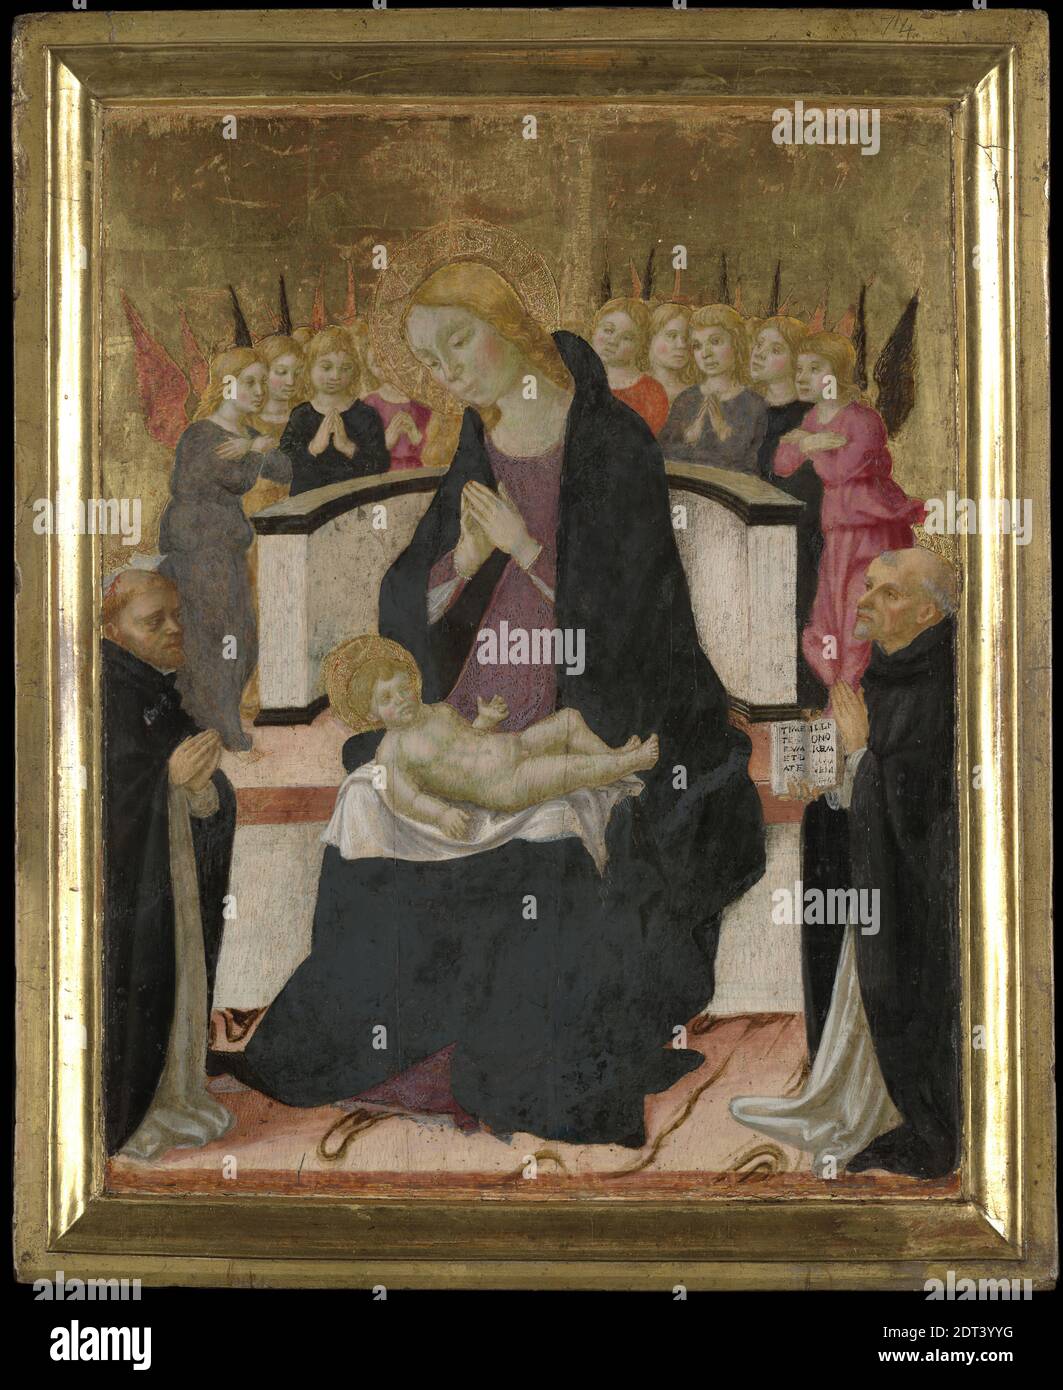 Artist: Lorenzo d’ Alessandro da Sanseverino, Italian, active ca. 1445–1503, Virgin Mary and the Infant Jesus with Saints and Angels, ca. 1480, Egg tempera and gold on wood panel, 37.5 × 30.78 cm (14 3/4 × 12 1/8 in.), Italian, Marche, 15th century, Paintings Stock Photo